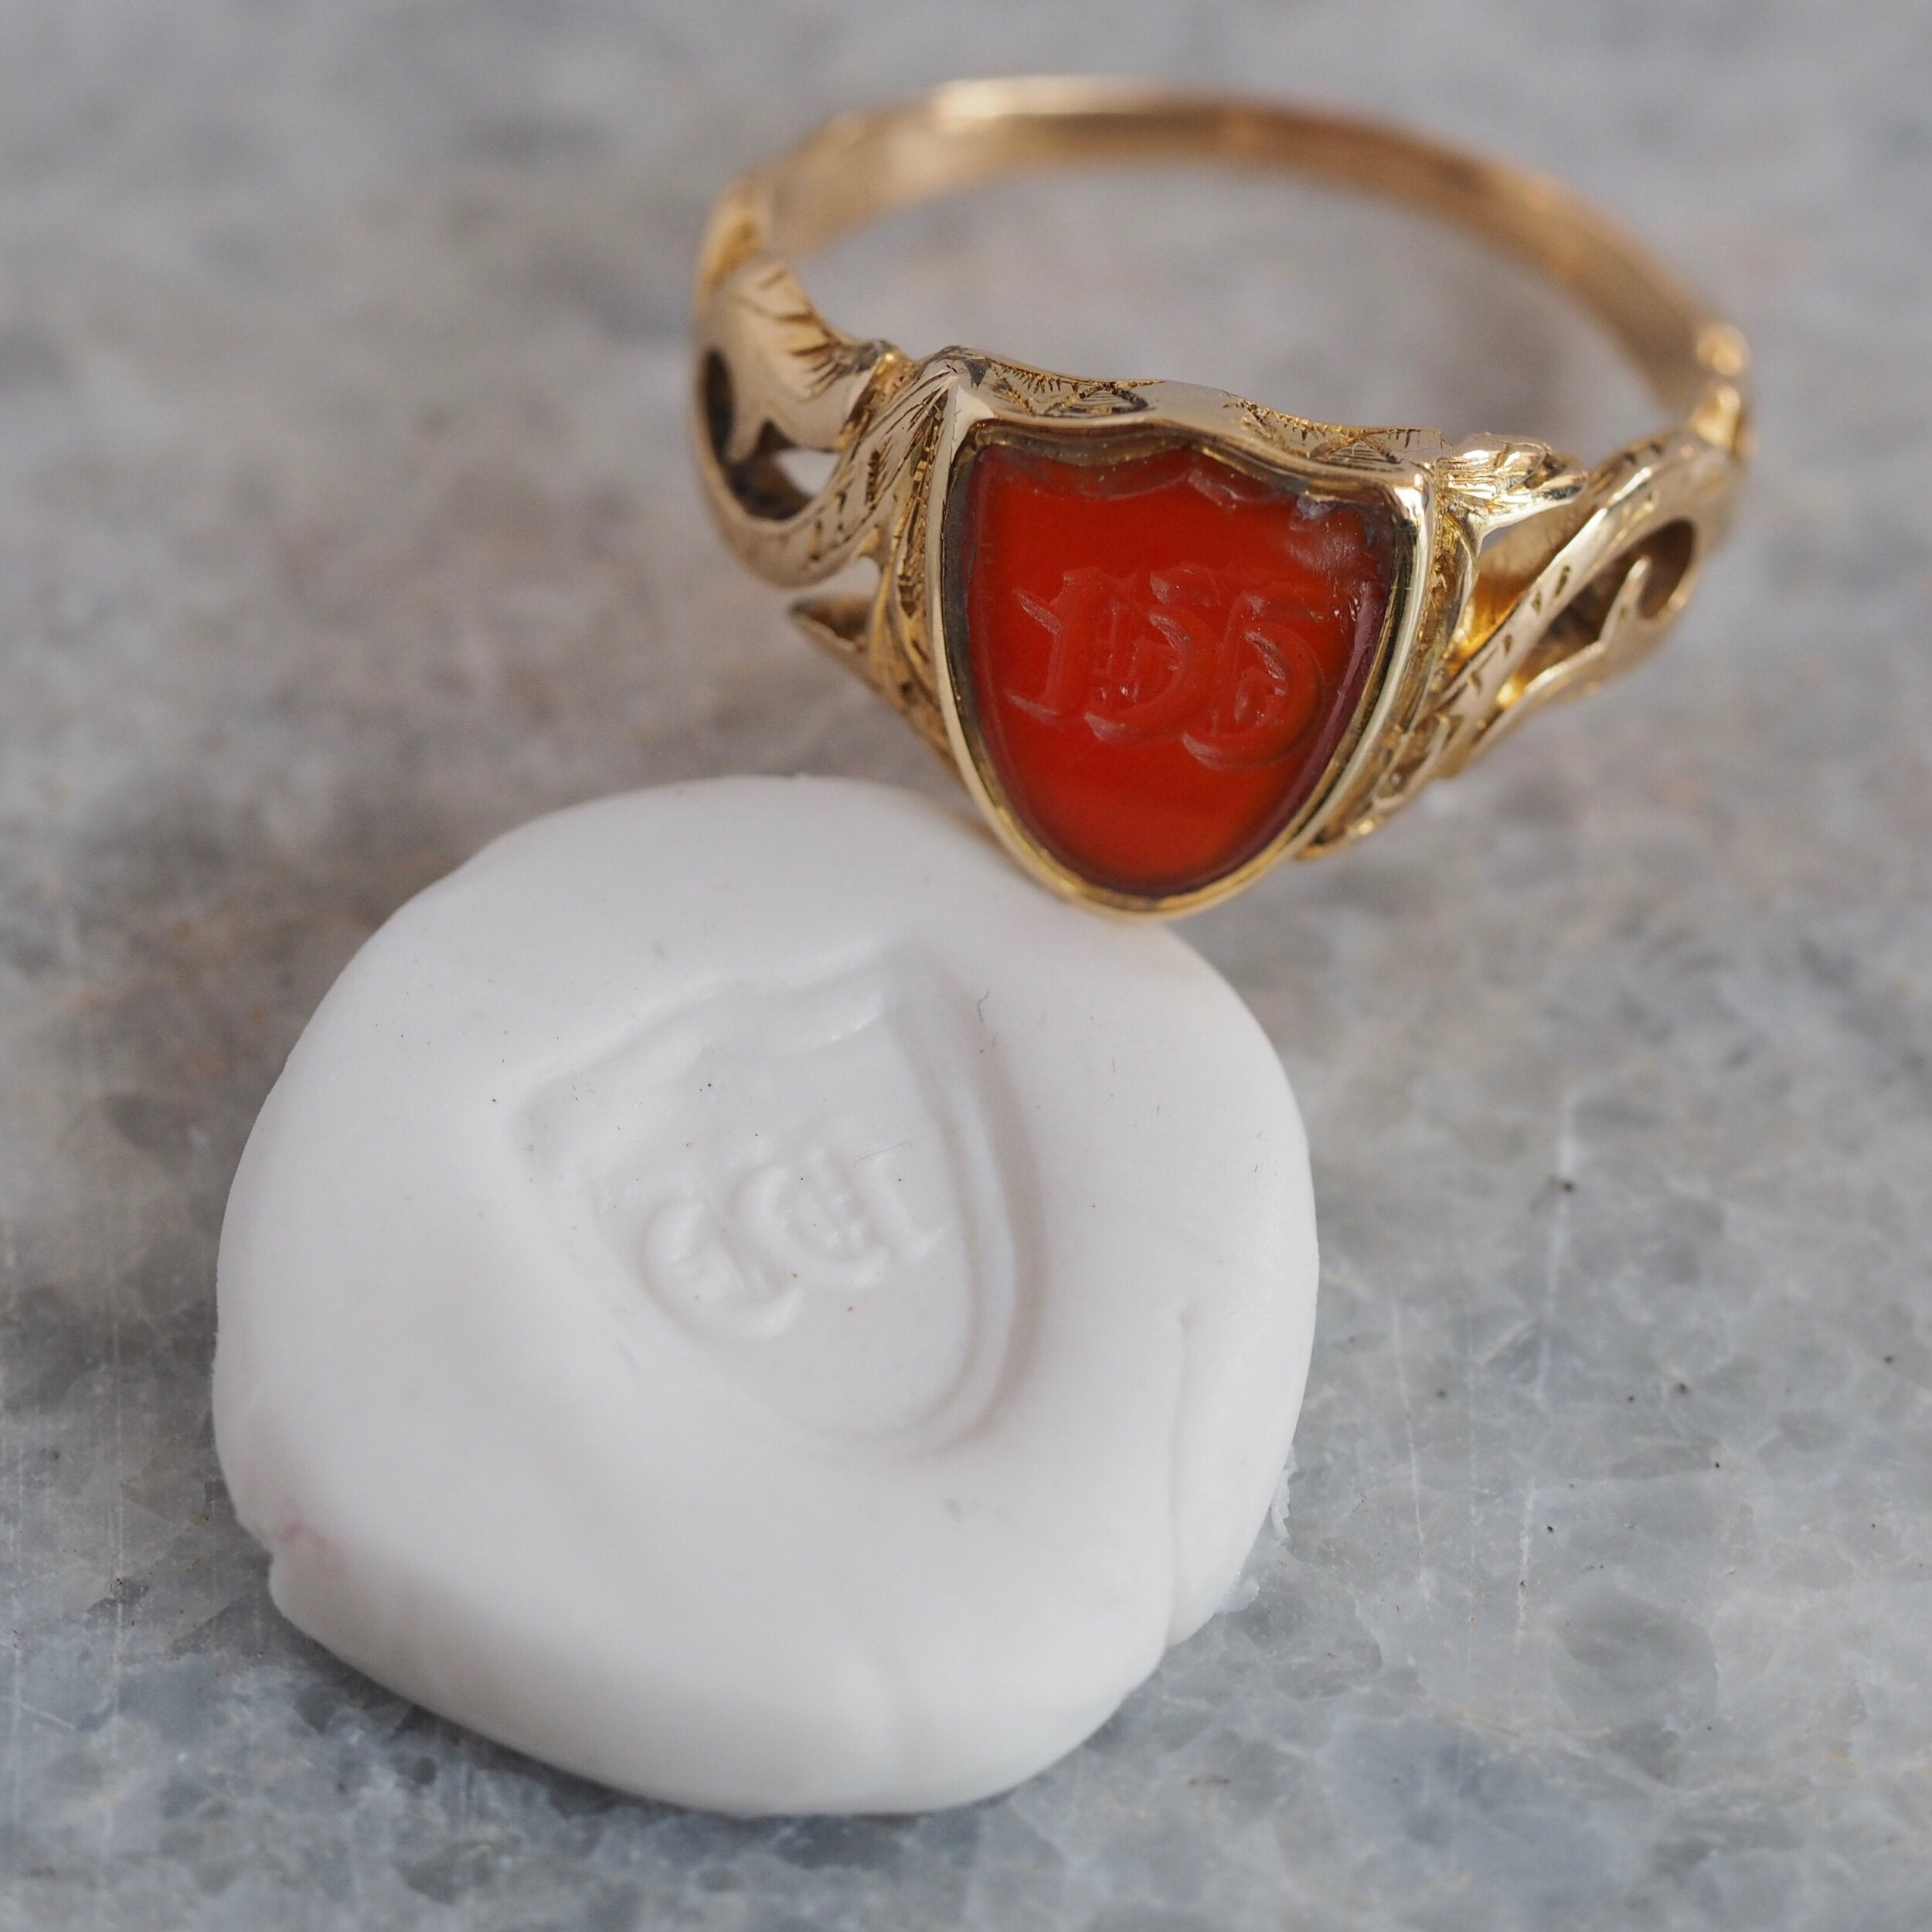 Silver Signet Monogram Ring - The Vintage Pearl